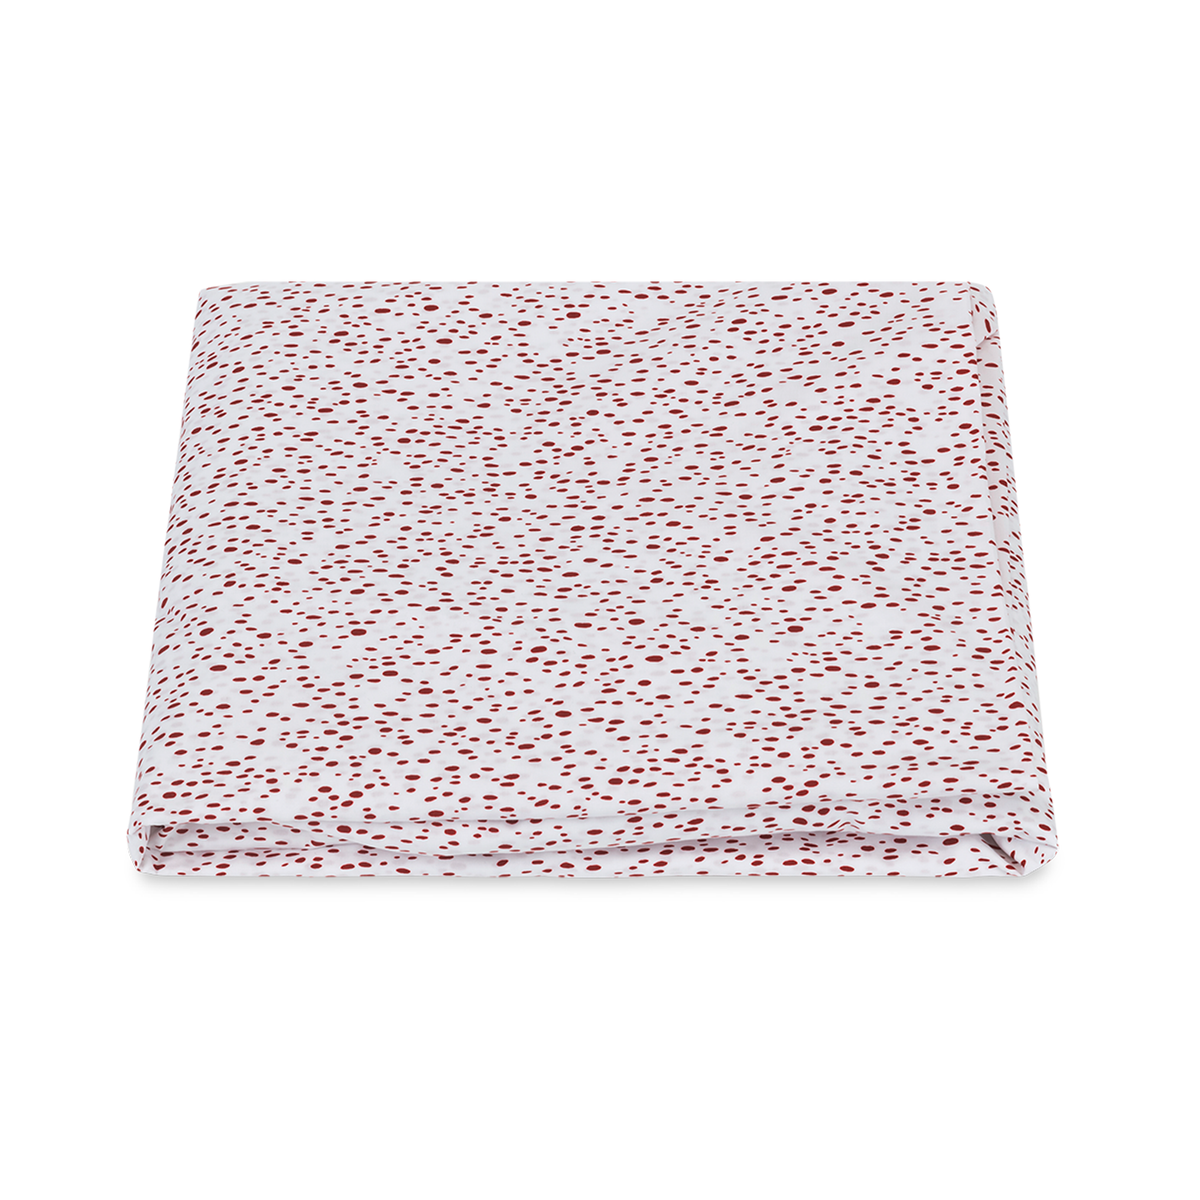 Folded Fitted Sheet of Matouk Celine Bedding in Redberry Color